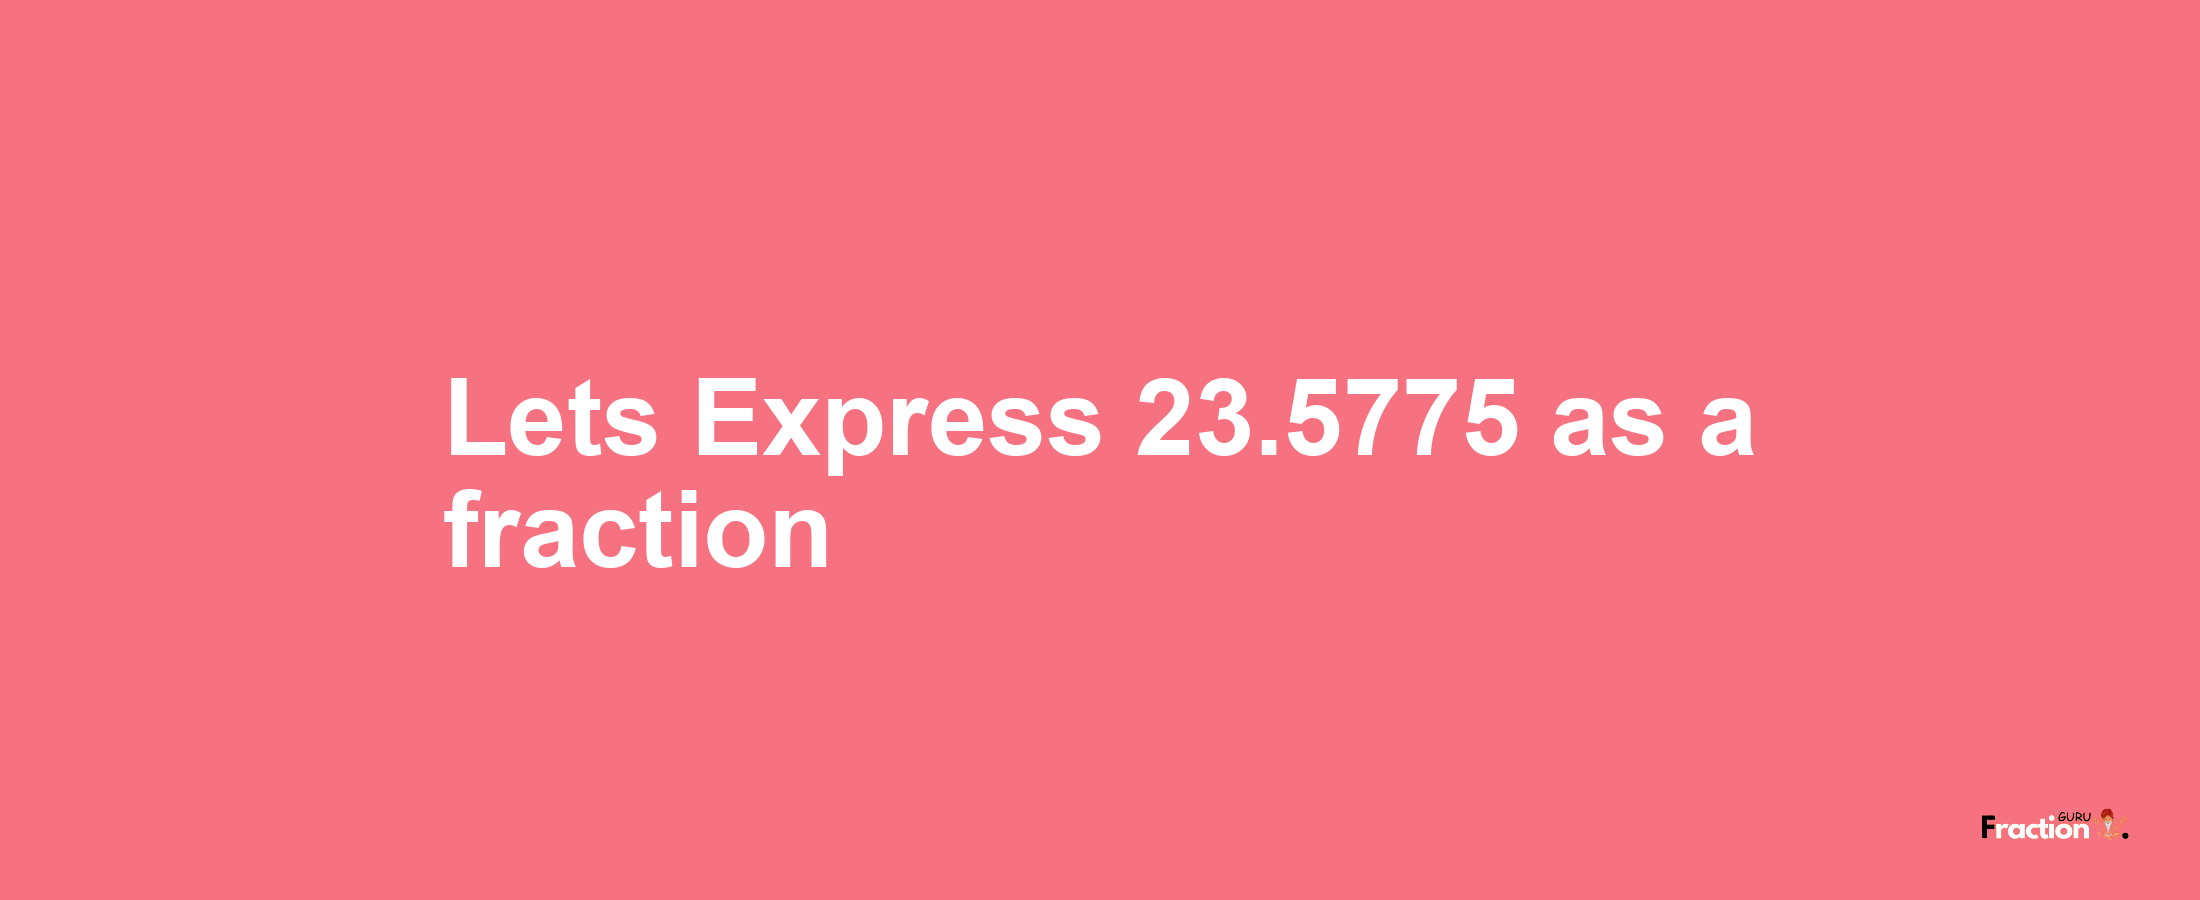 Lets Express 23.5775 as afraction